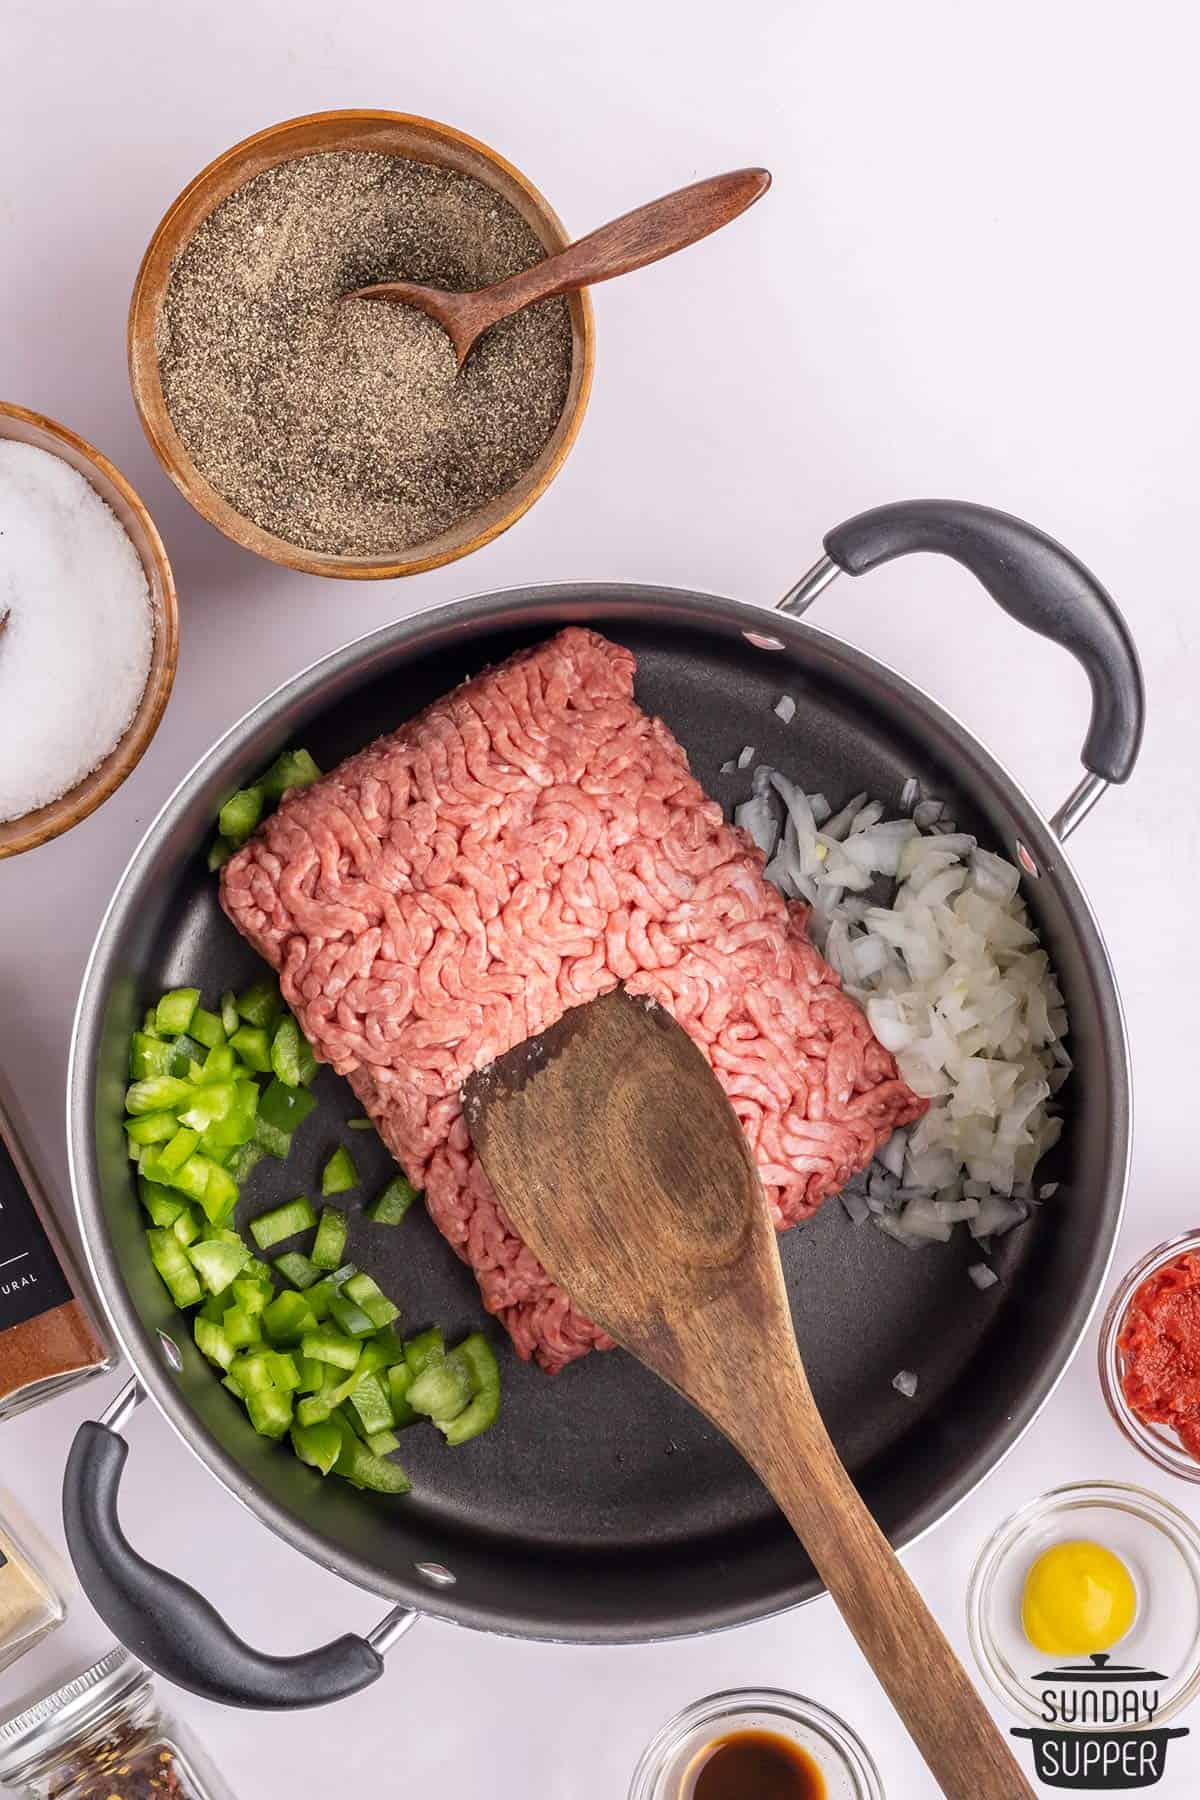 the ground meat, onions, and peppers added to a pan